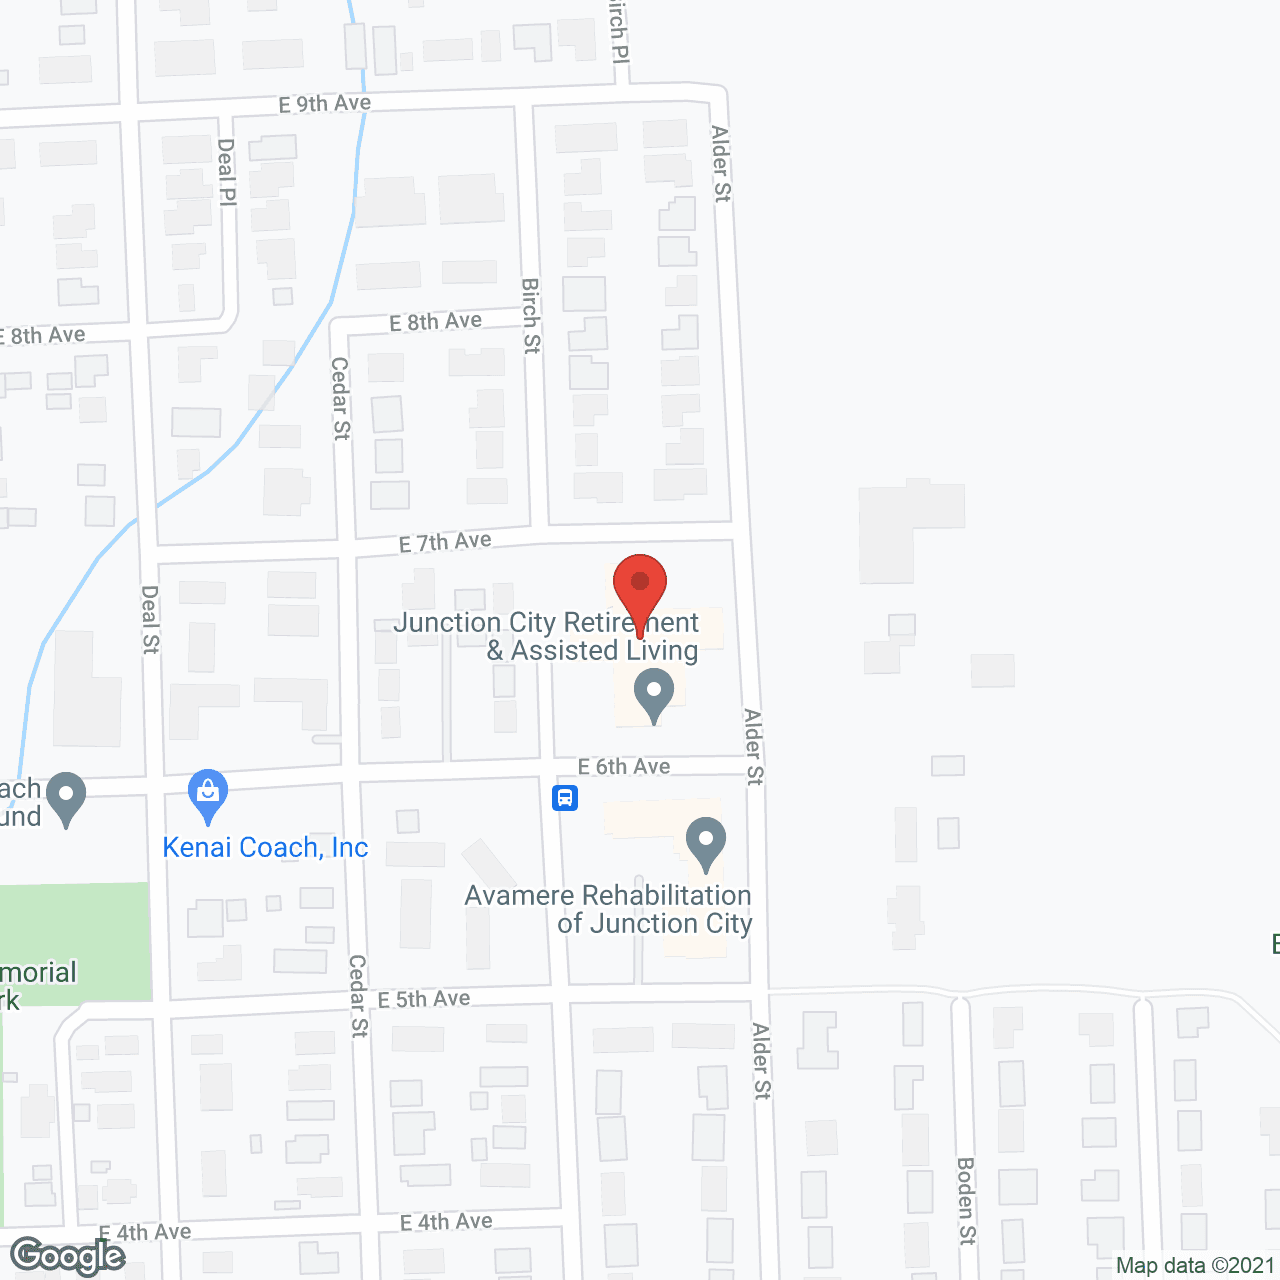 Junction City Retirement and Assisted Living in google map